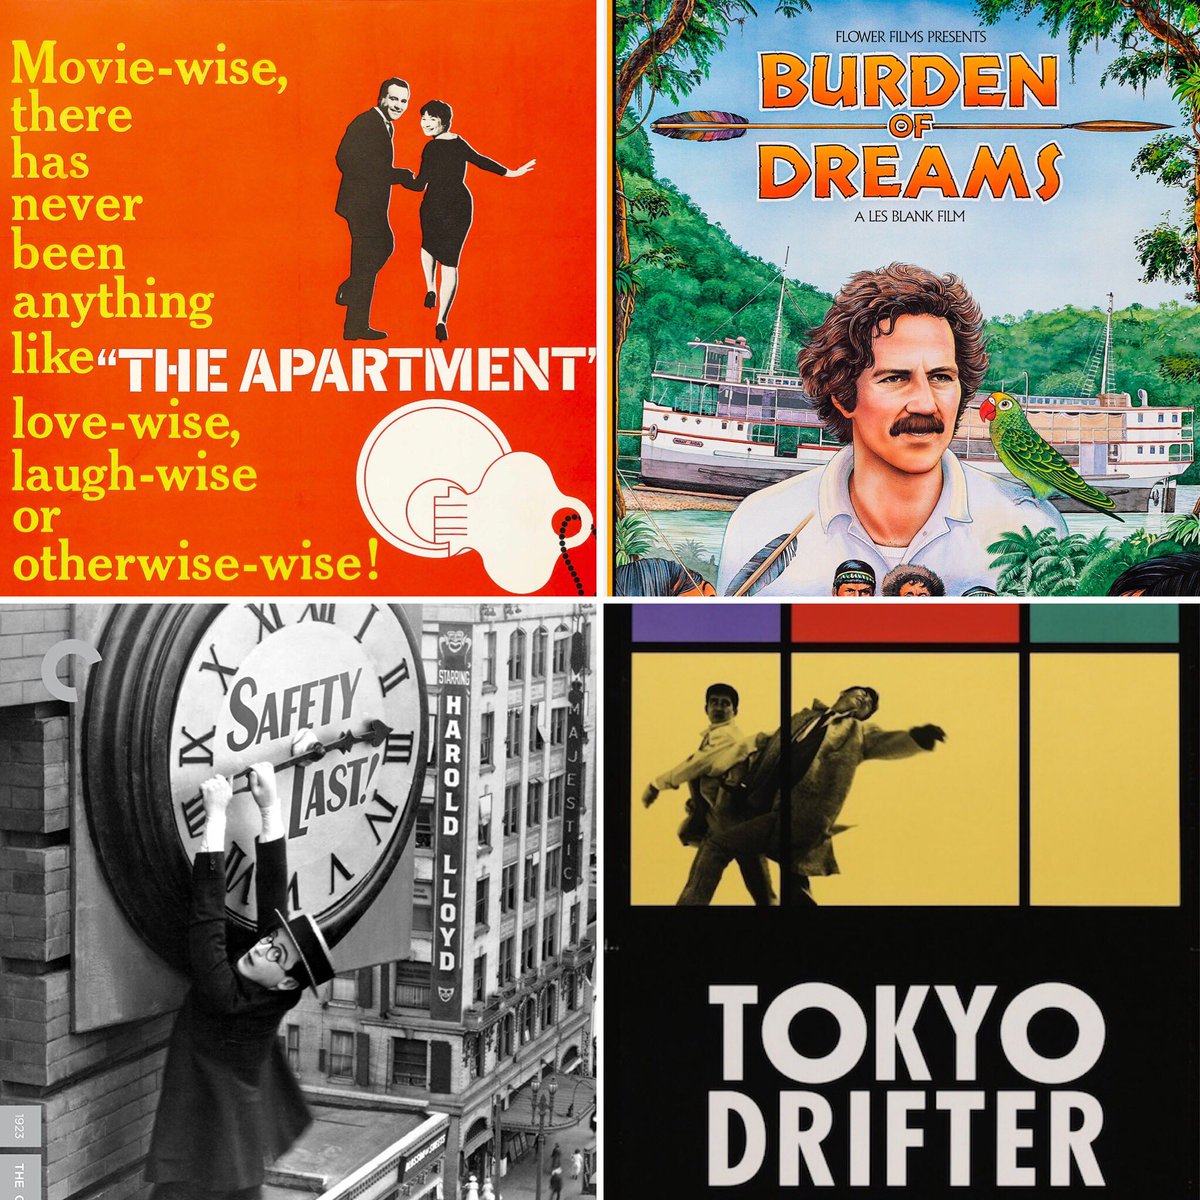 Isolation Movie #1What should I watch tonight? First response decides!The Apartment Burden of DreamsSafety LastTokyo Drifter